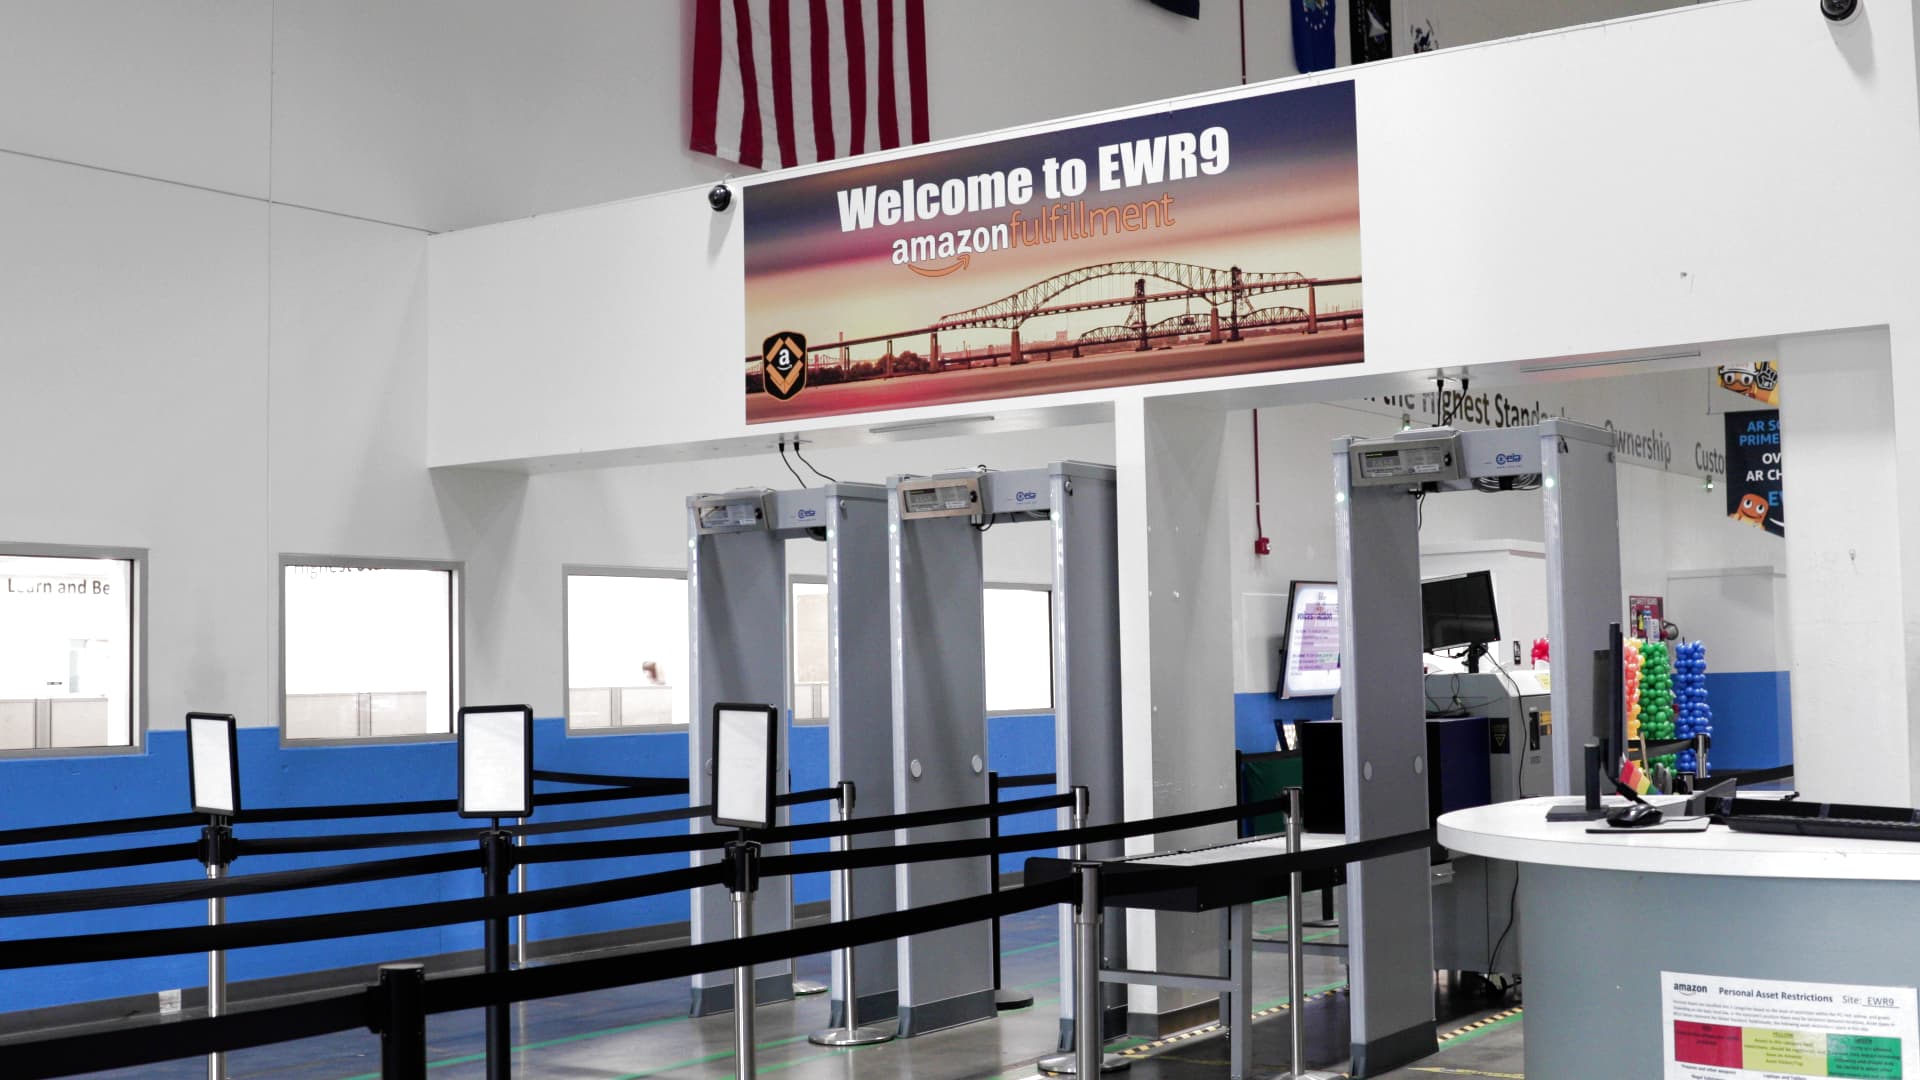 The entrance to Amazon's EWR9 warehouse in Carteret, New Jersey, is shown on June 15, 2022. An Amazon worker died at EWR9 during the annual Prime Day rush on July 13, 2022.